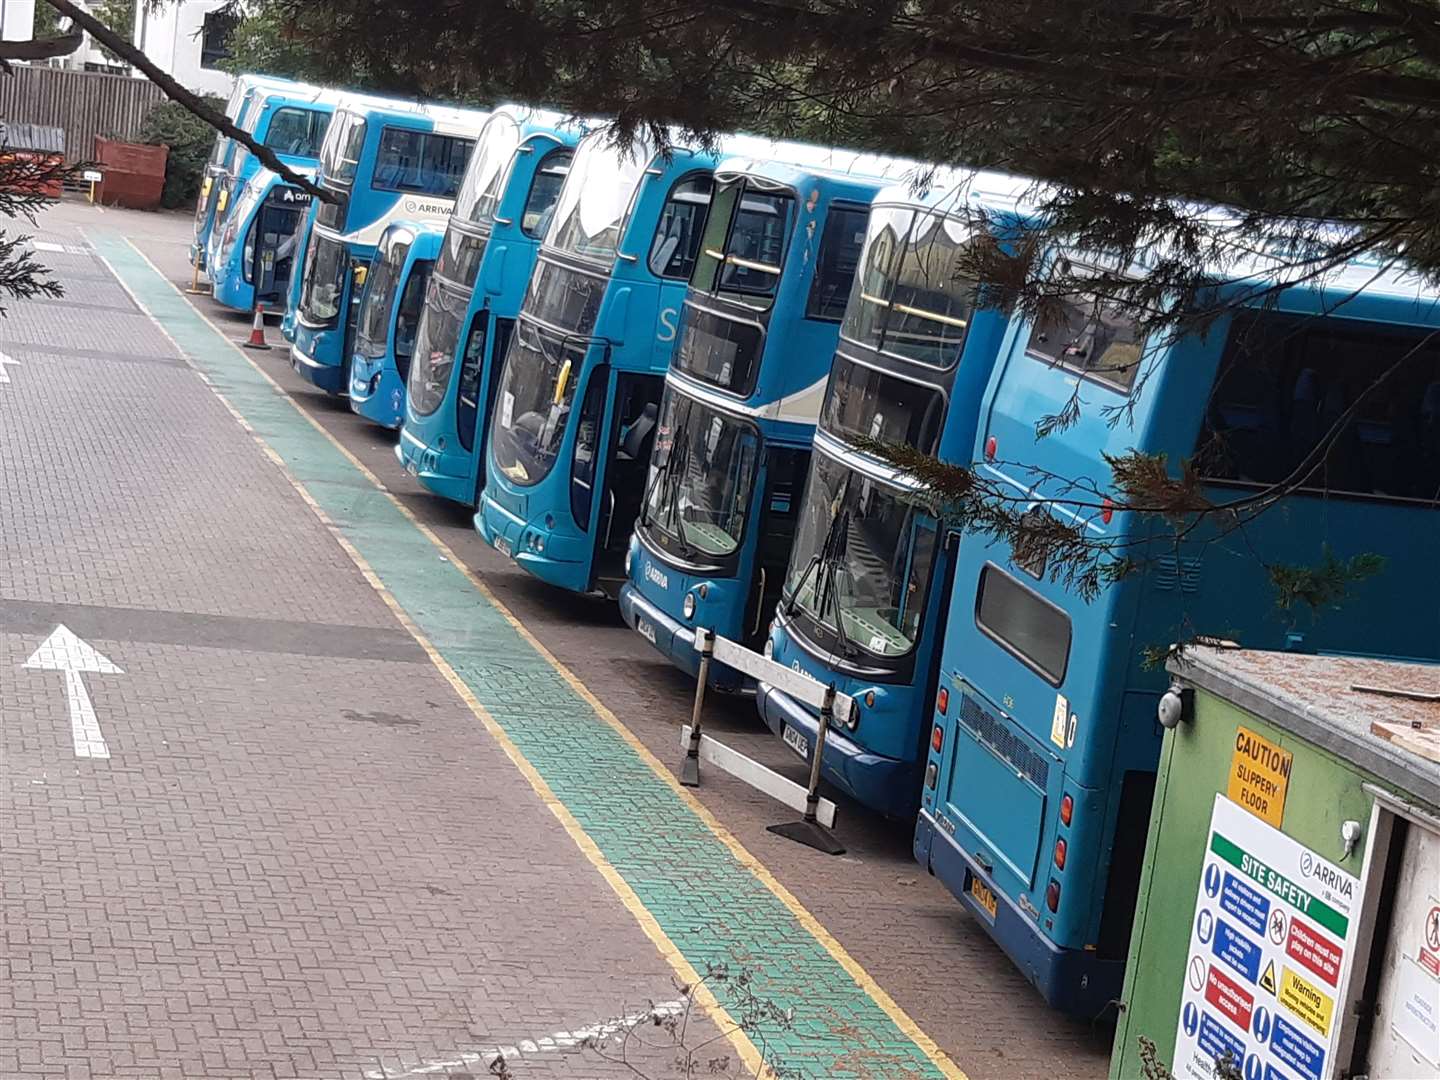 Buses will stay in their depots for 13 days over the coming two months